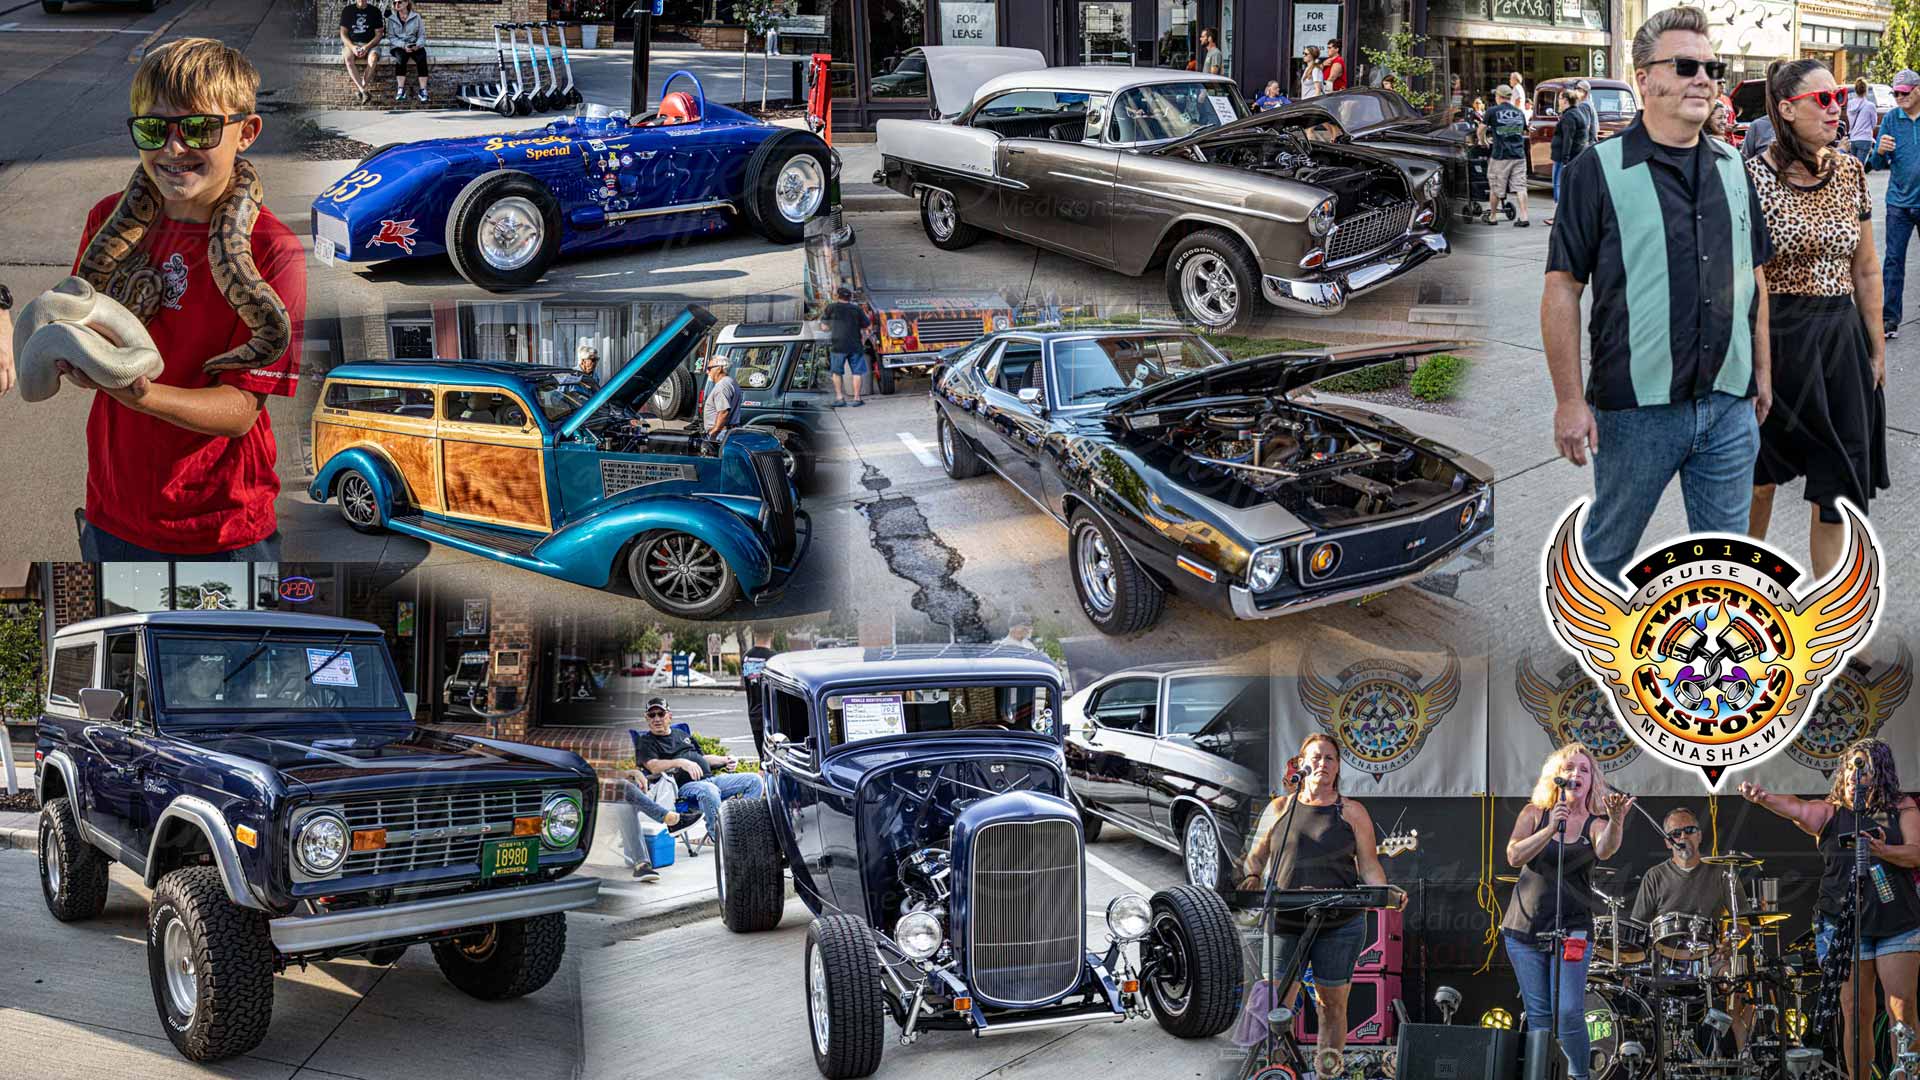 Twisted Pistons Cruise In Car Show In Menasha Wisconsin